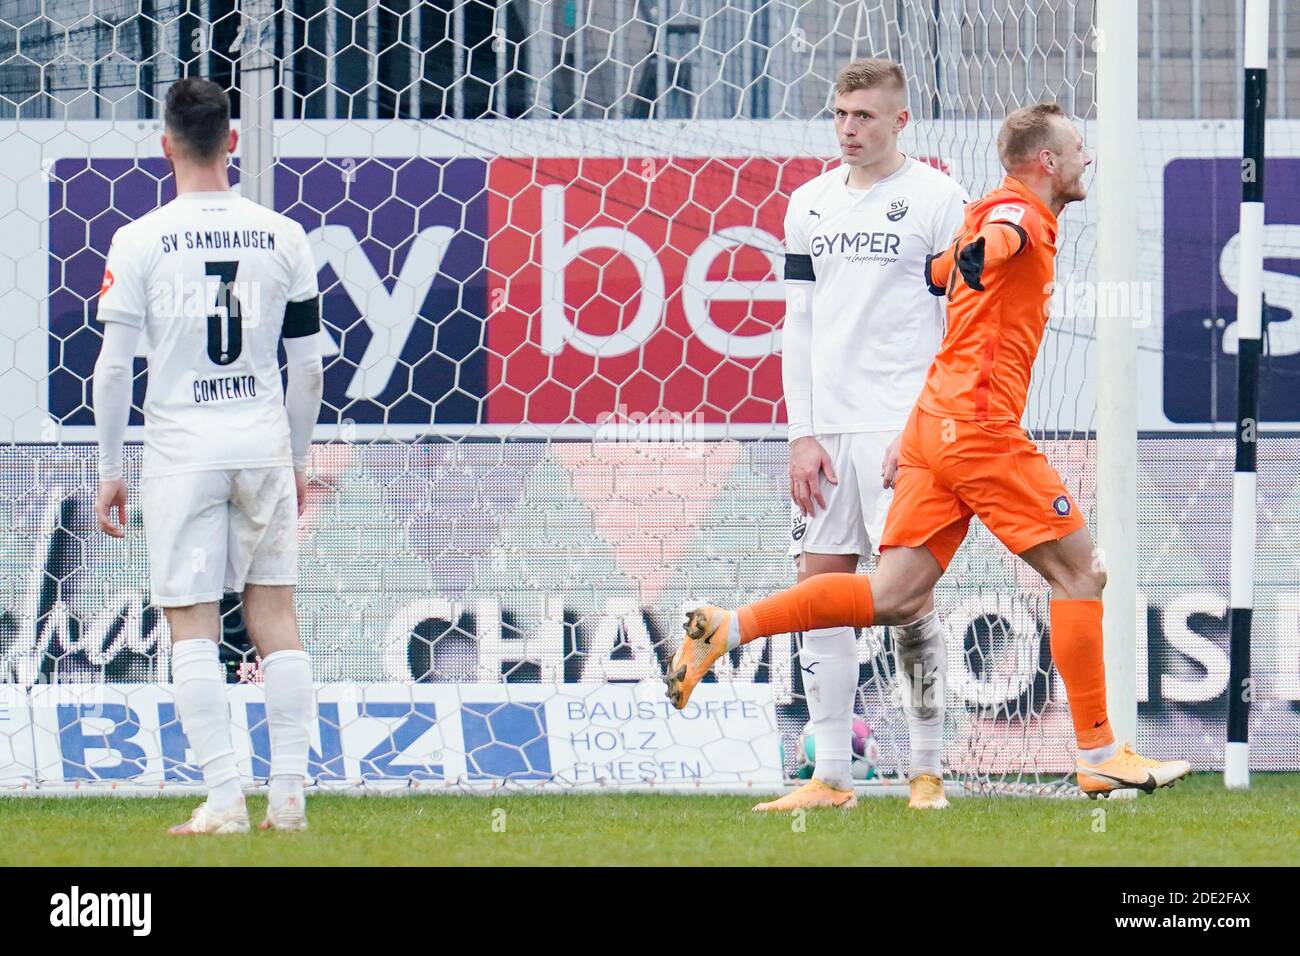 Sandhausen, Germany. 28th Nov, 2020. Football: 2nd Bundesliga, SV Sandhausen - FC Erzgebirge Aue, 9th matchday, Hardtwaldstadion. Goal scorer Ben Zolinski (r) from Erzgebirge Aue cheers for the goal of the 1:3. Credit: Uwe Anspach/dpa - IMPORTANT NOTE: In accordance with the regulations of the DFL Deutsche Fußball Liga and the DFB Deutscher Fußball-Bund, it is prohibited to exploit or have exploited in the stadium and/or from the game taken photographs in the form of sequence images and/or video-like photo series./dpa/Alamy Live News Stock Photo